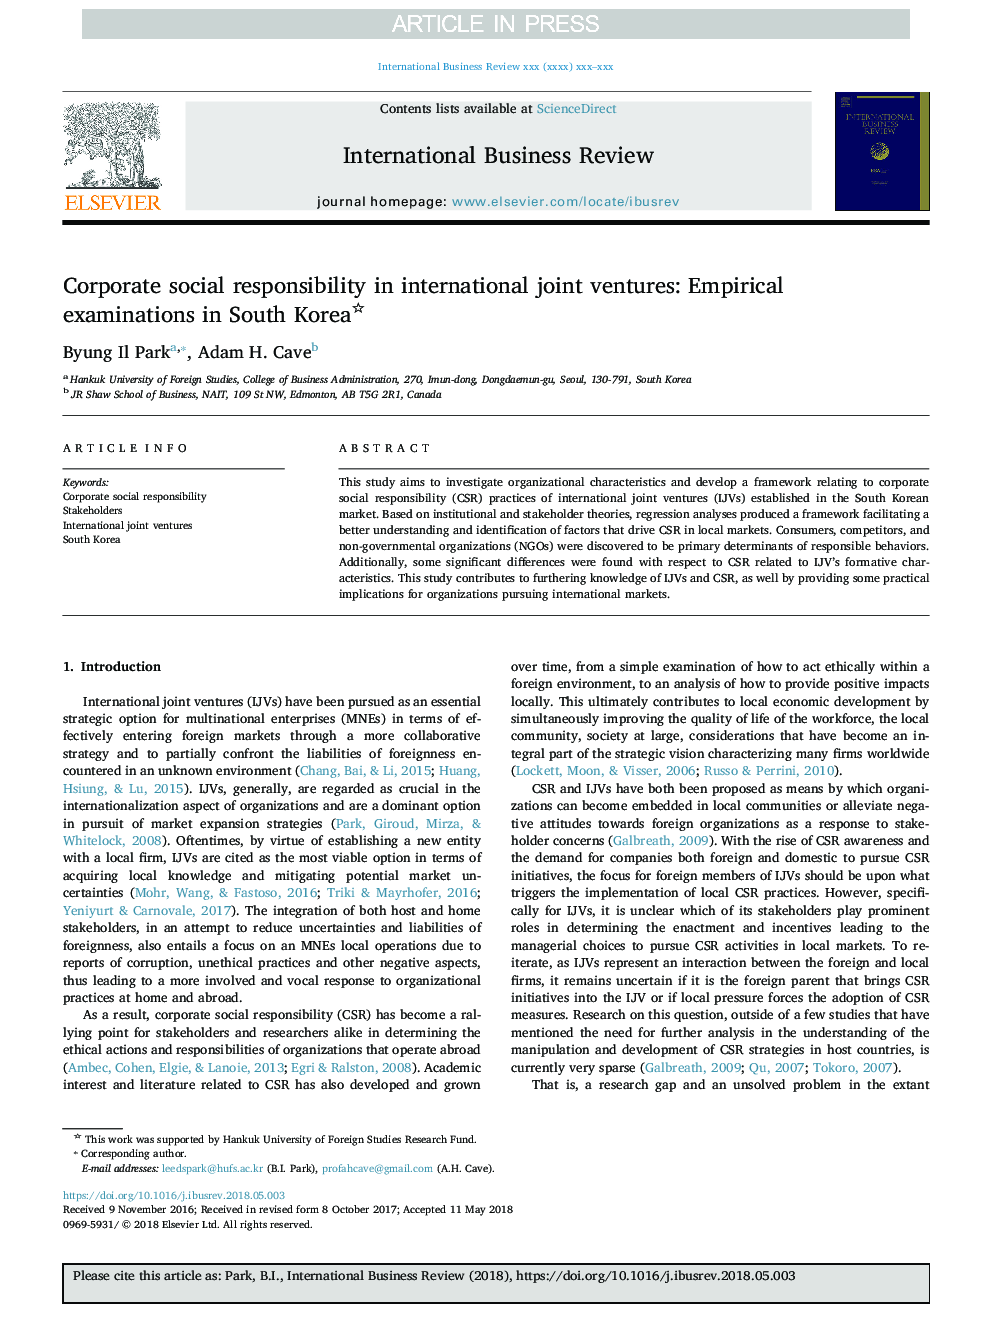 Corporate social responsibility in international joint ventures: Empirical examinations in South Korea